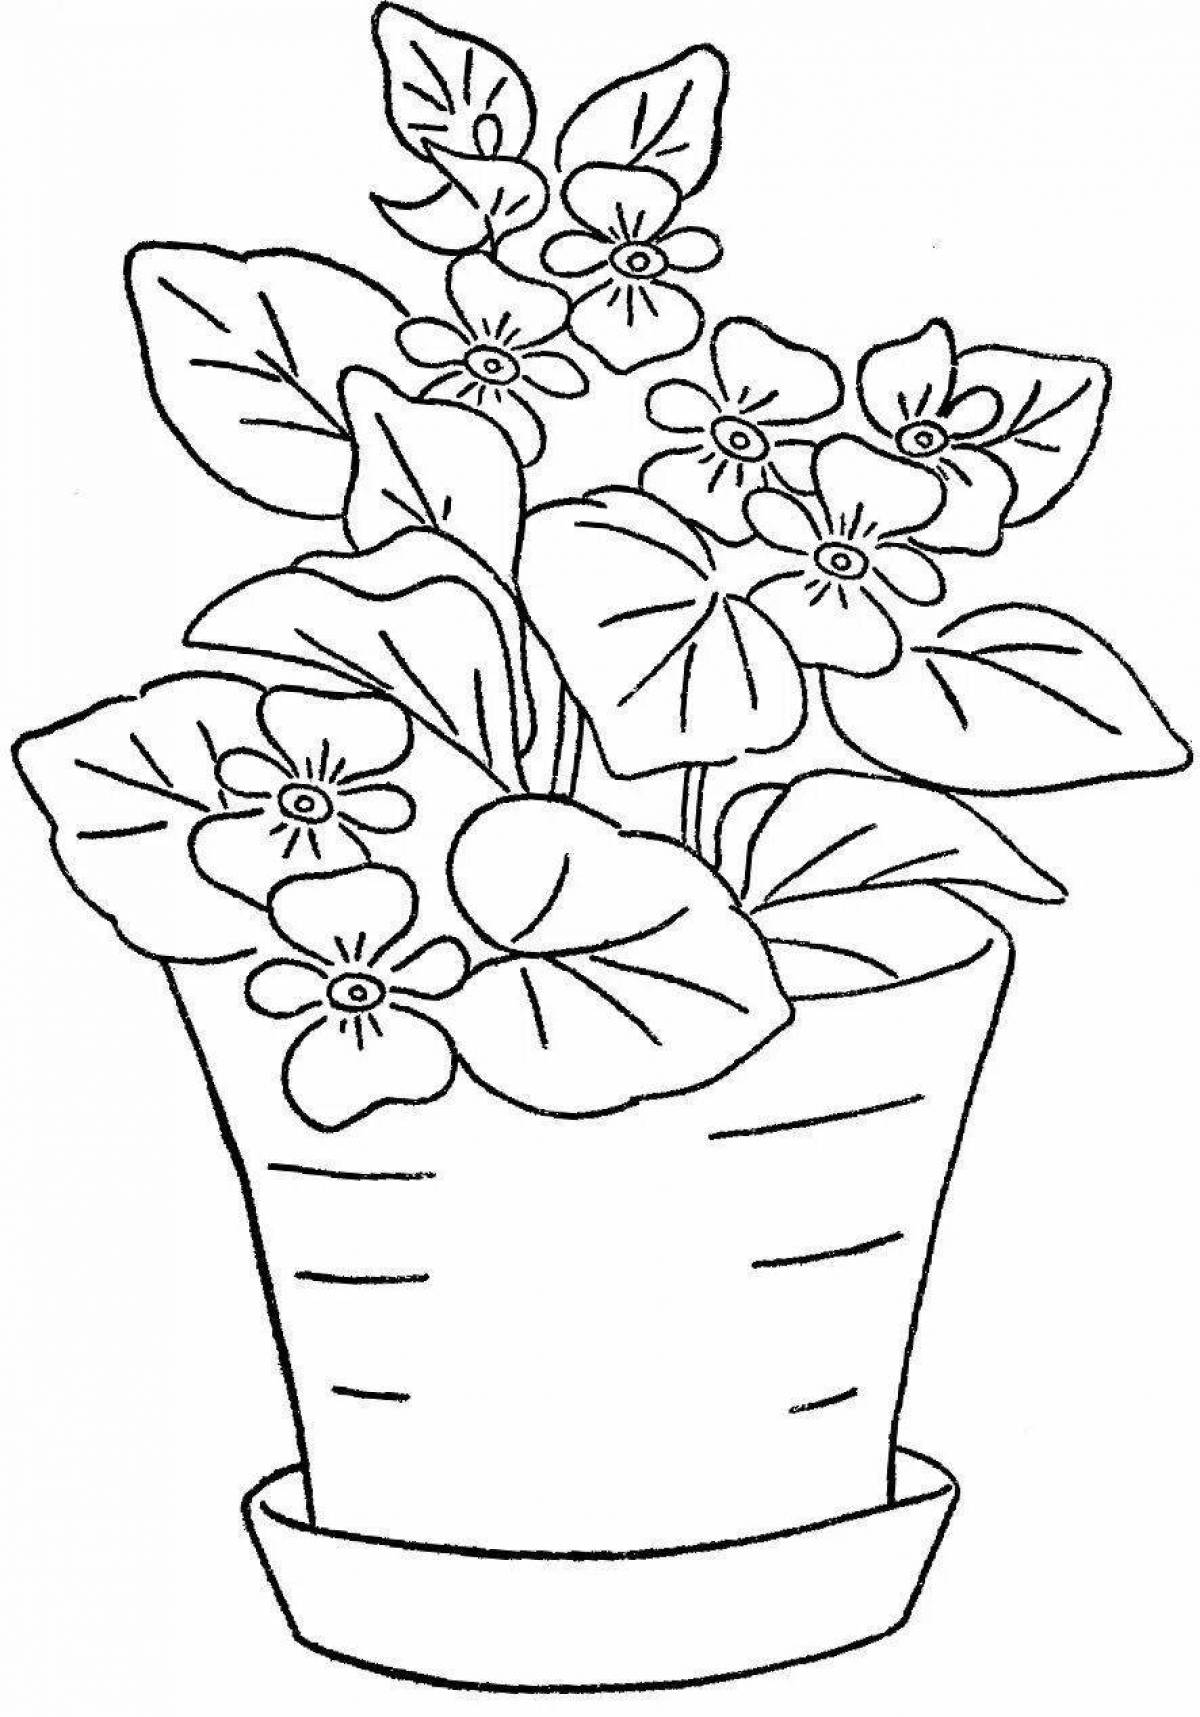 Inviting purple houseplants coloring page